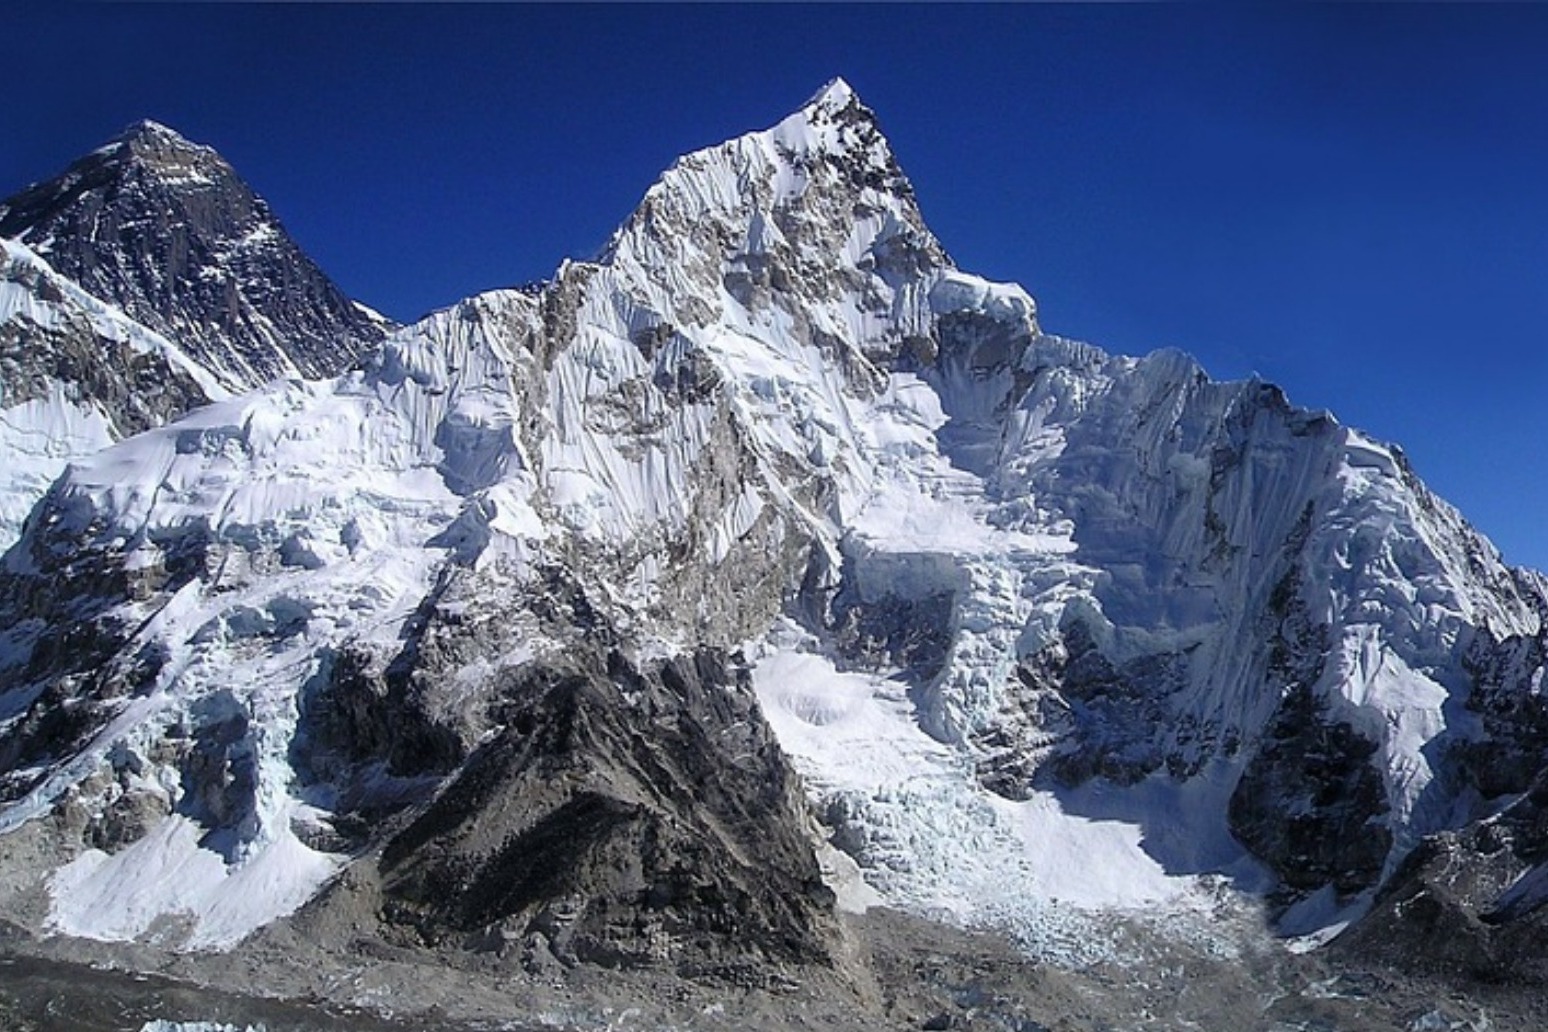 Sherpa climbs Mount Everest for record 23rd time 